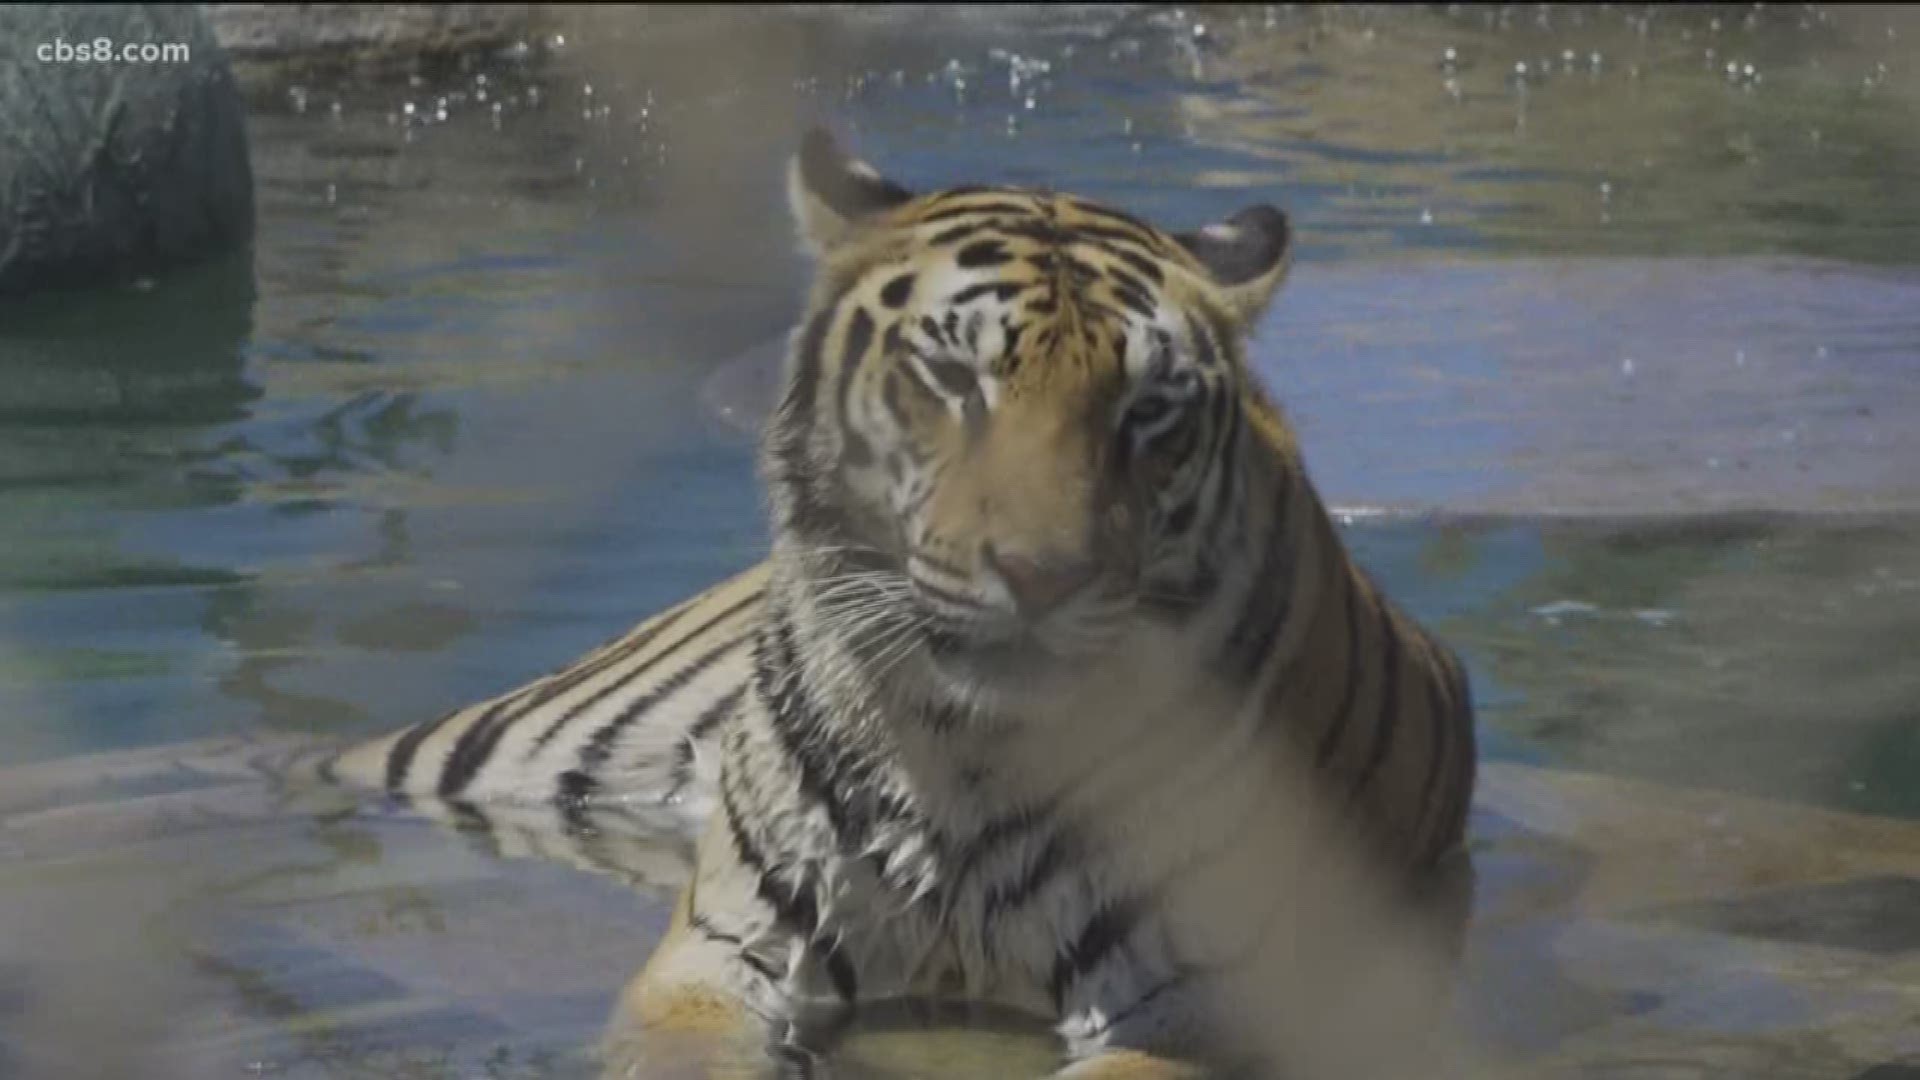 Moka, the Bengal hybrid who confiscated at the border almost two years ago, this week celebrated the end of his first full year at Lions, Tigers & Bears Sanctuary in Alpine.